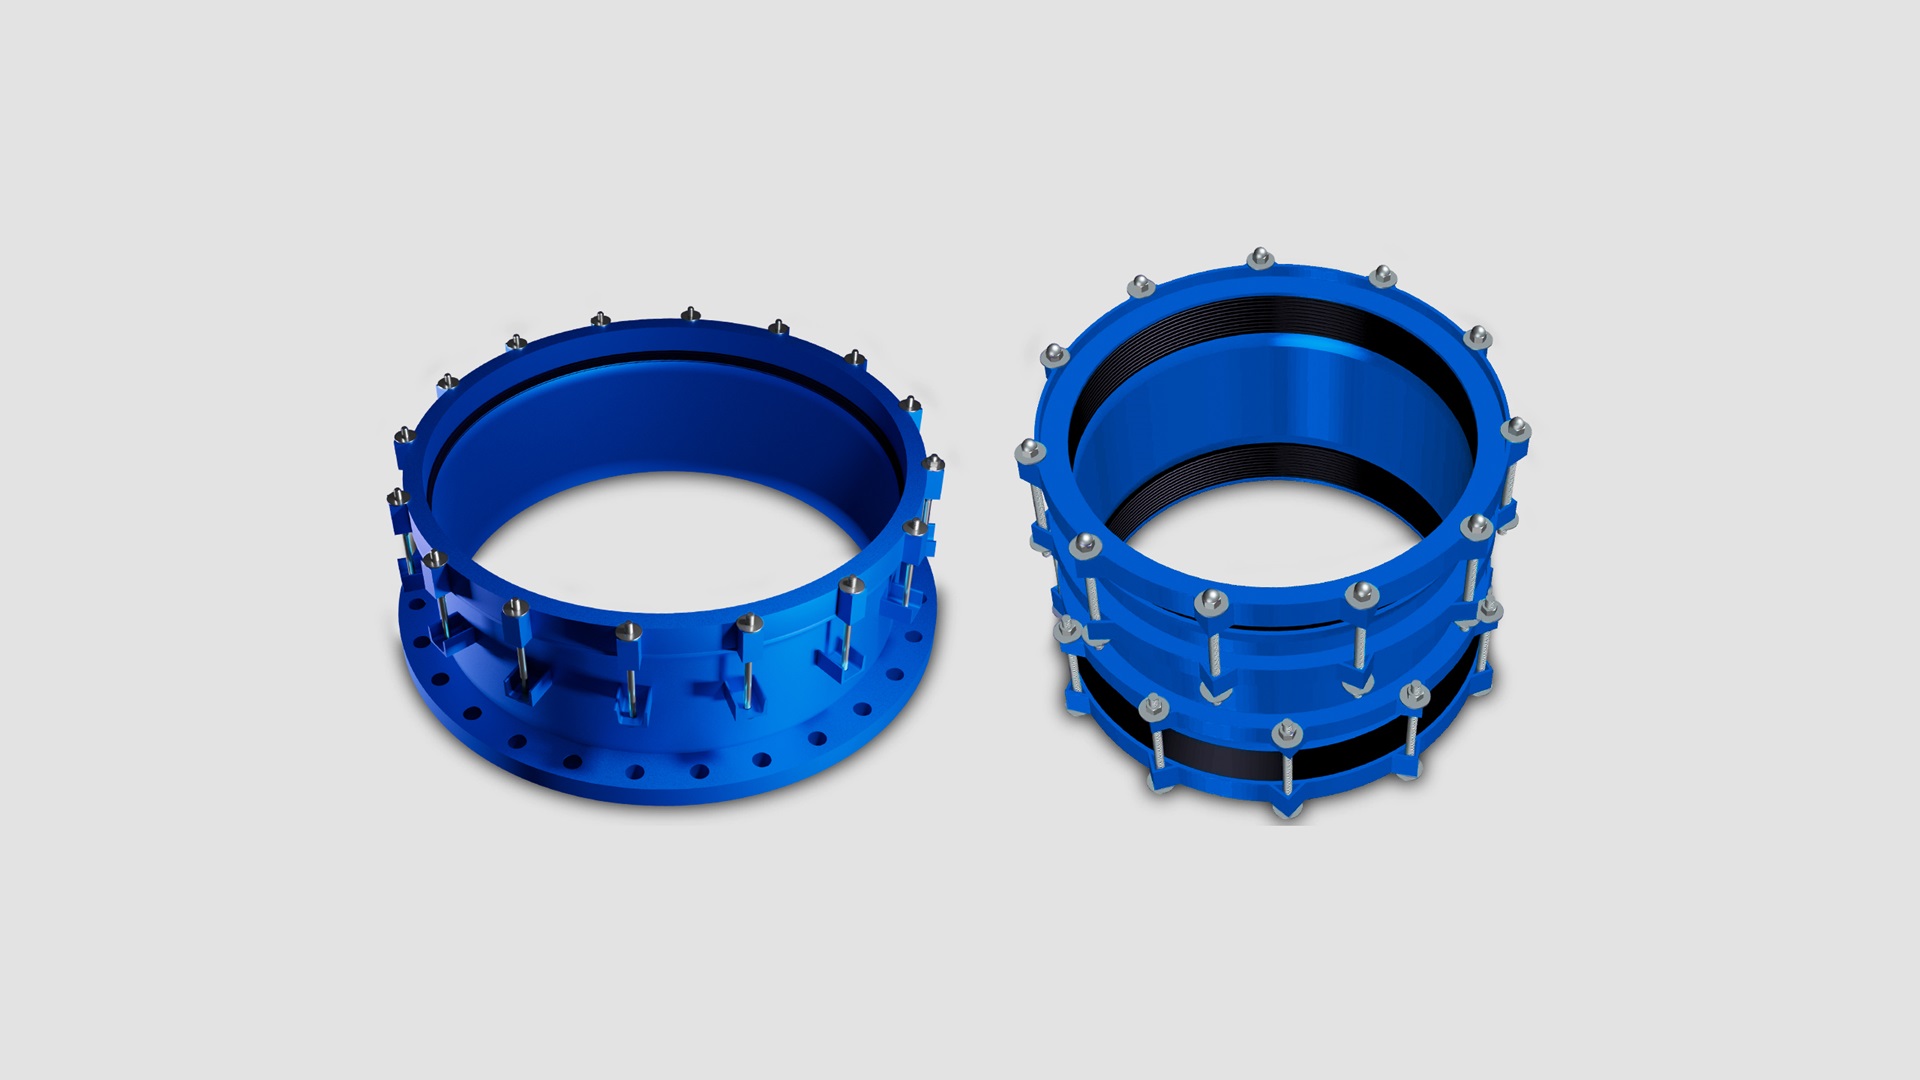 Super Hydro universal fabricated couplings and adaptors